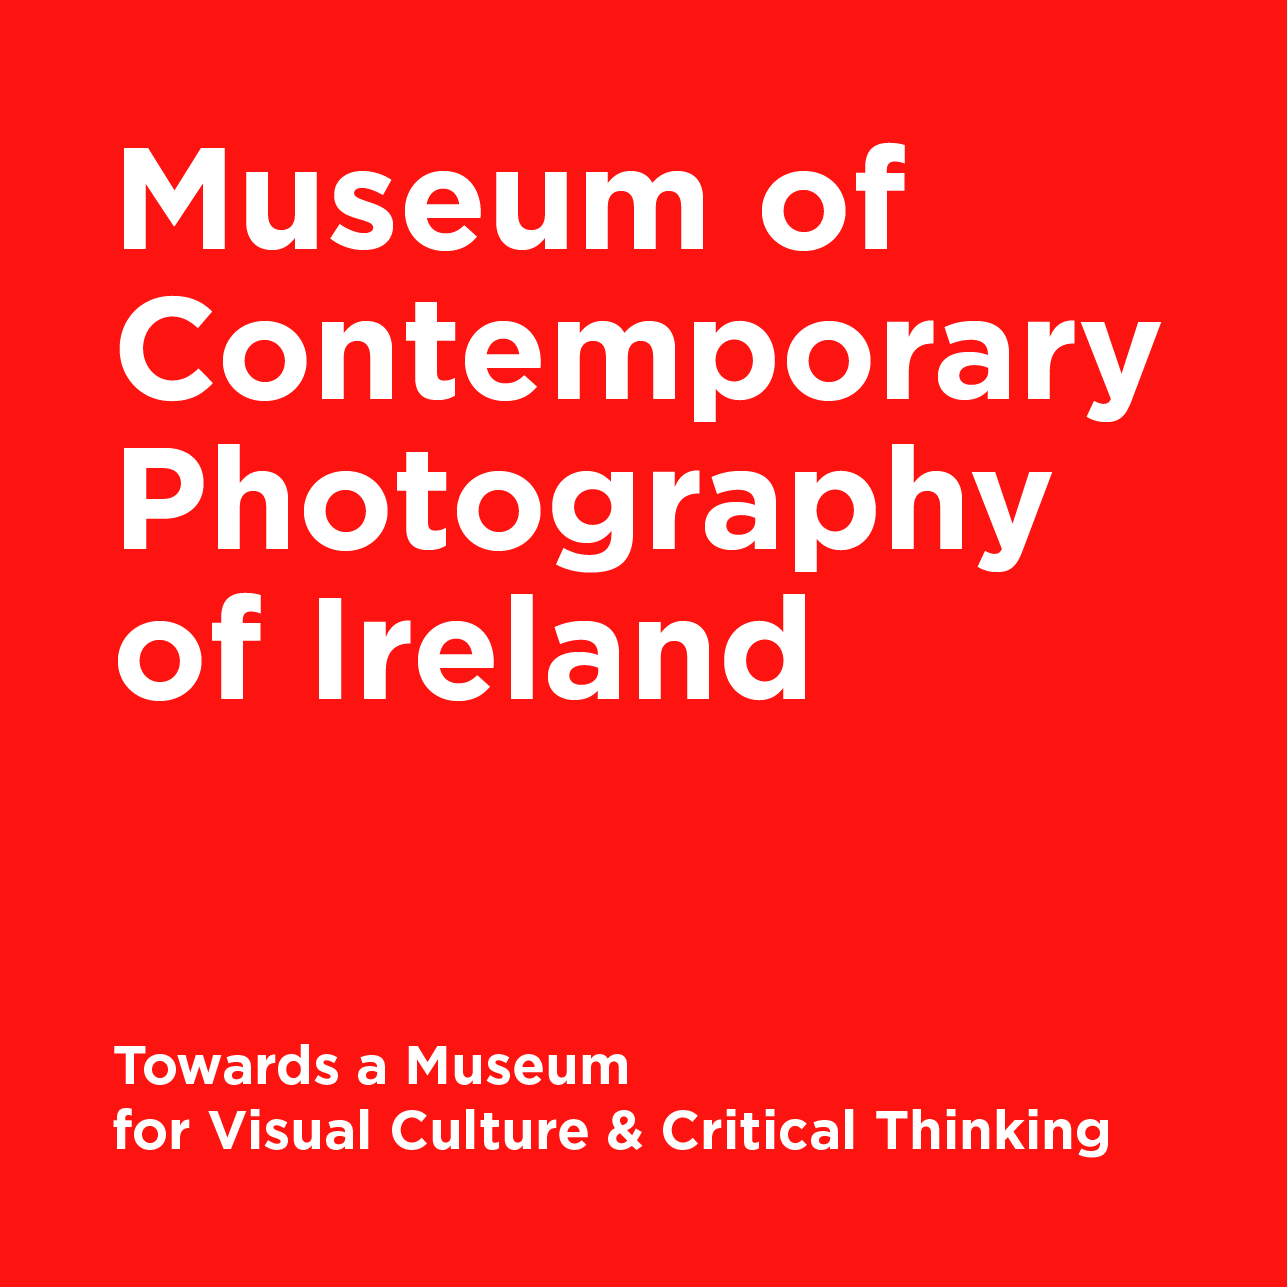 The Museum of Contemporary Photography of Ireland